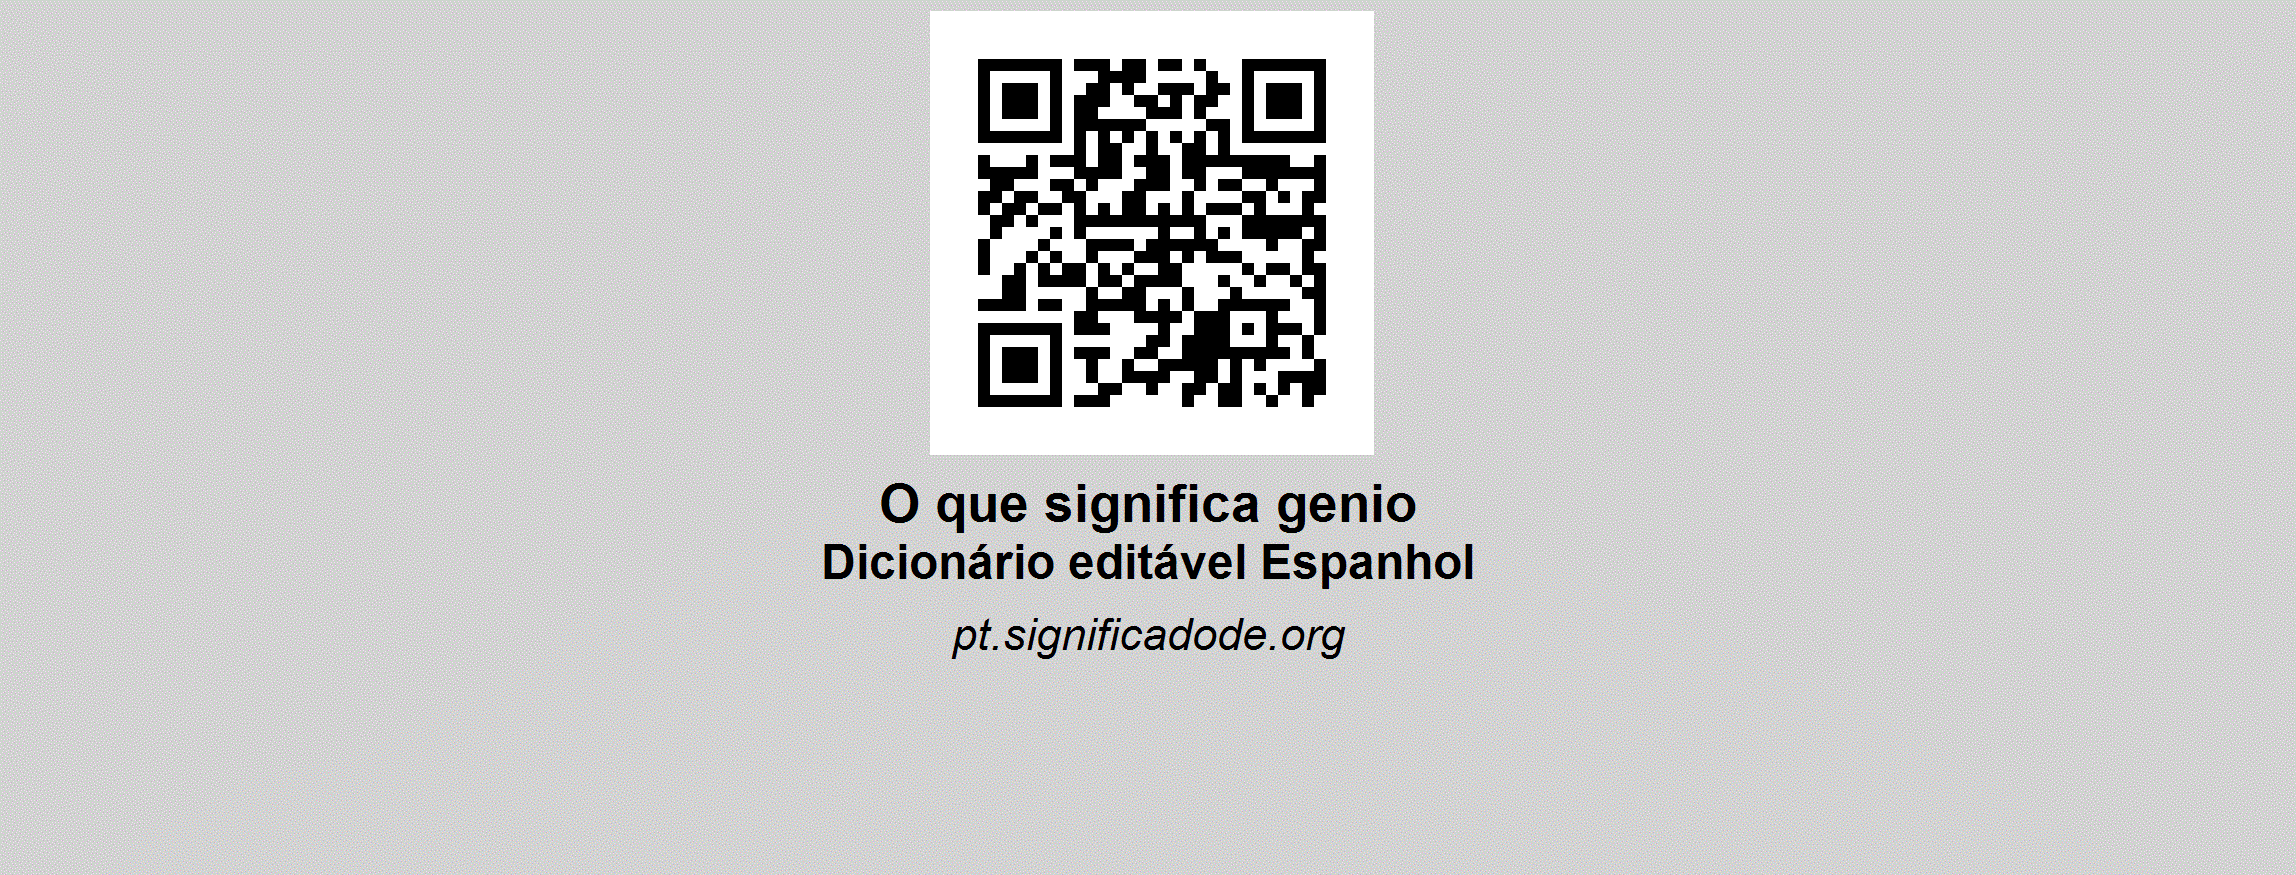 https://imgpt.significadode.org/portugues/que-significa/grande/genio.gif